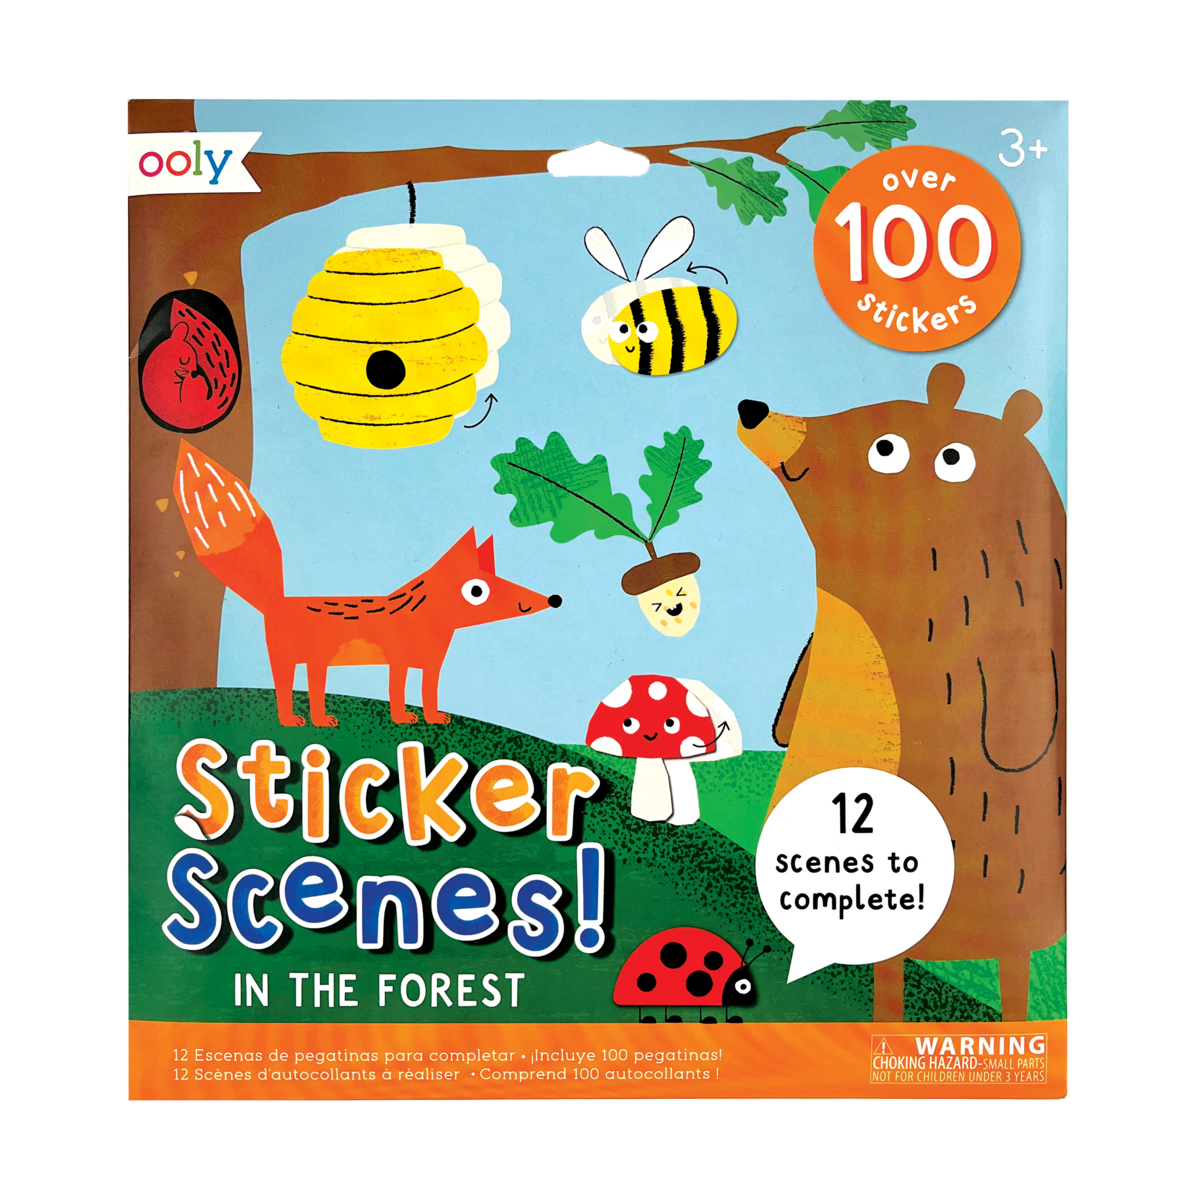 In the Forest Sticker Scenes! front of packaging